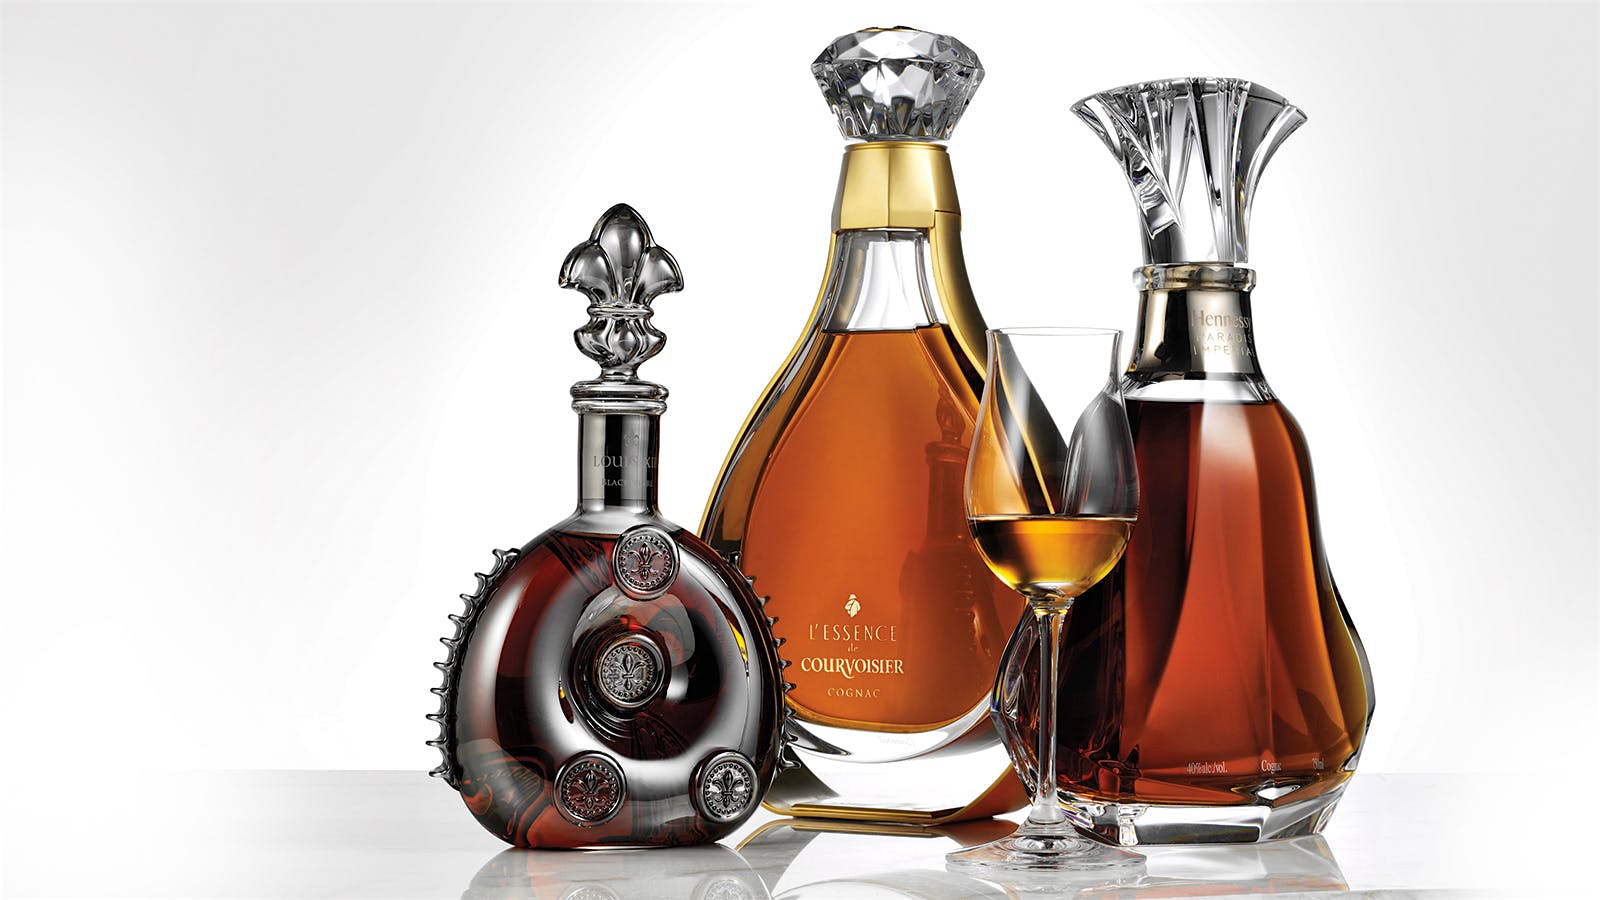 A century in a barrel: What makes LOUIS XIII one of the world's most  expensive and exquisite cognacs?